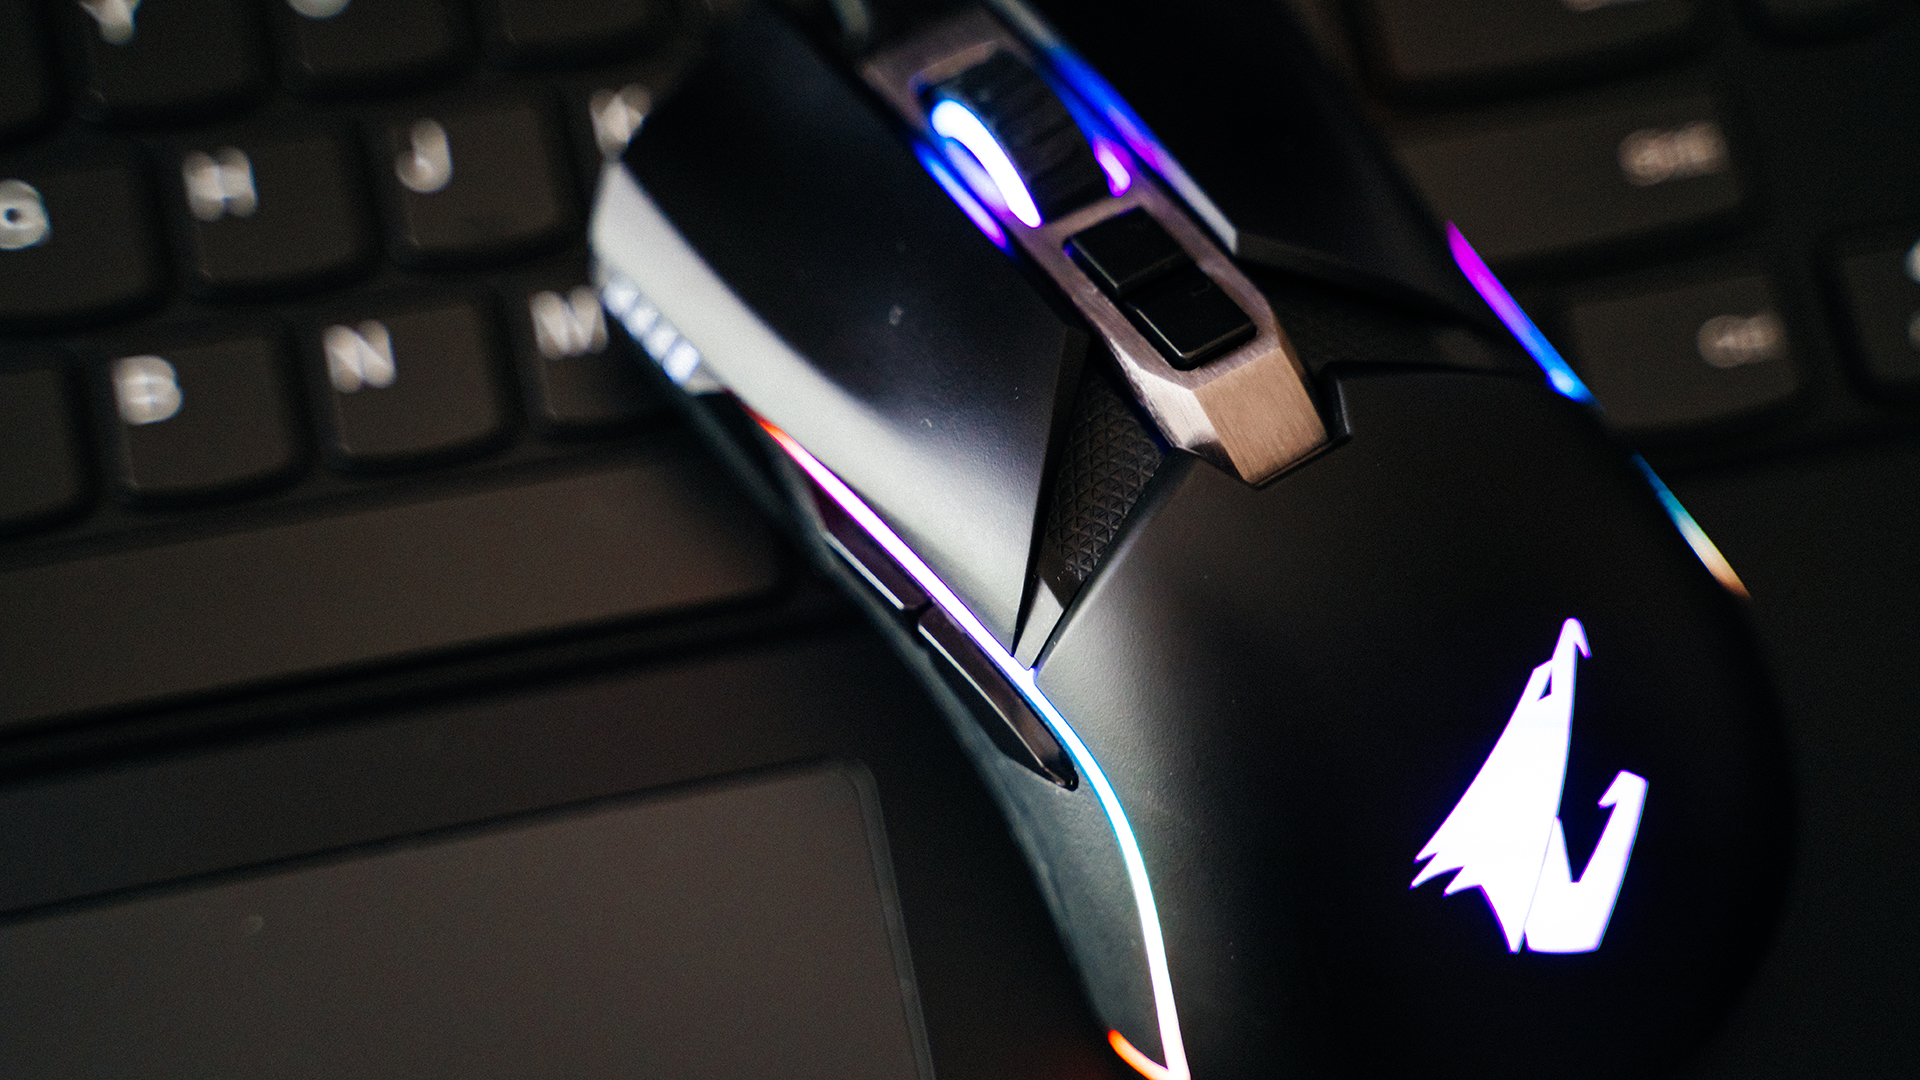 Best gaming mouse 2019: the best gaming mice we've tested